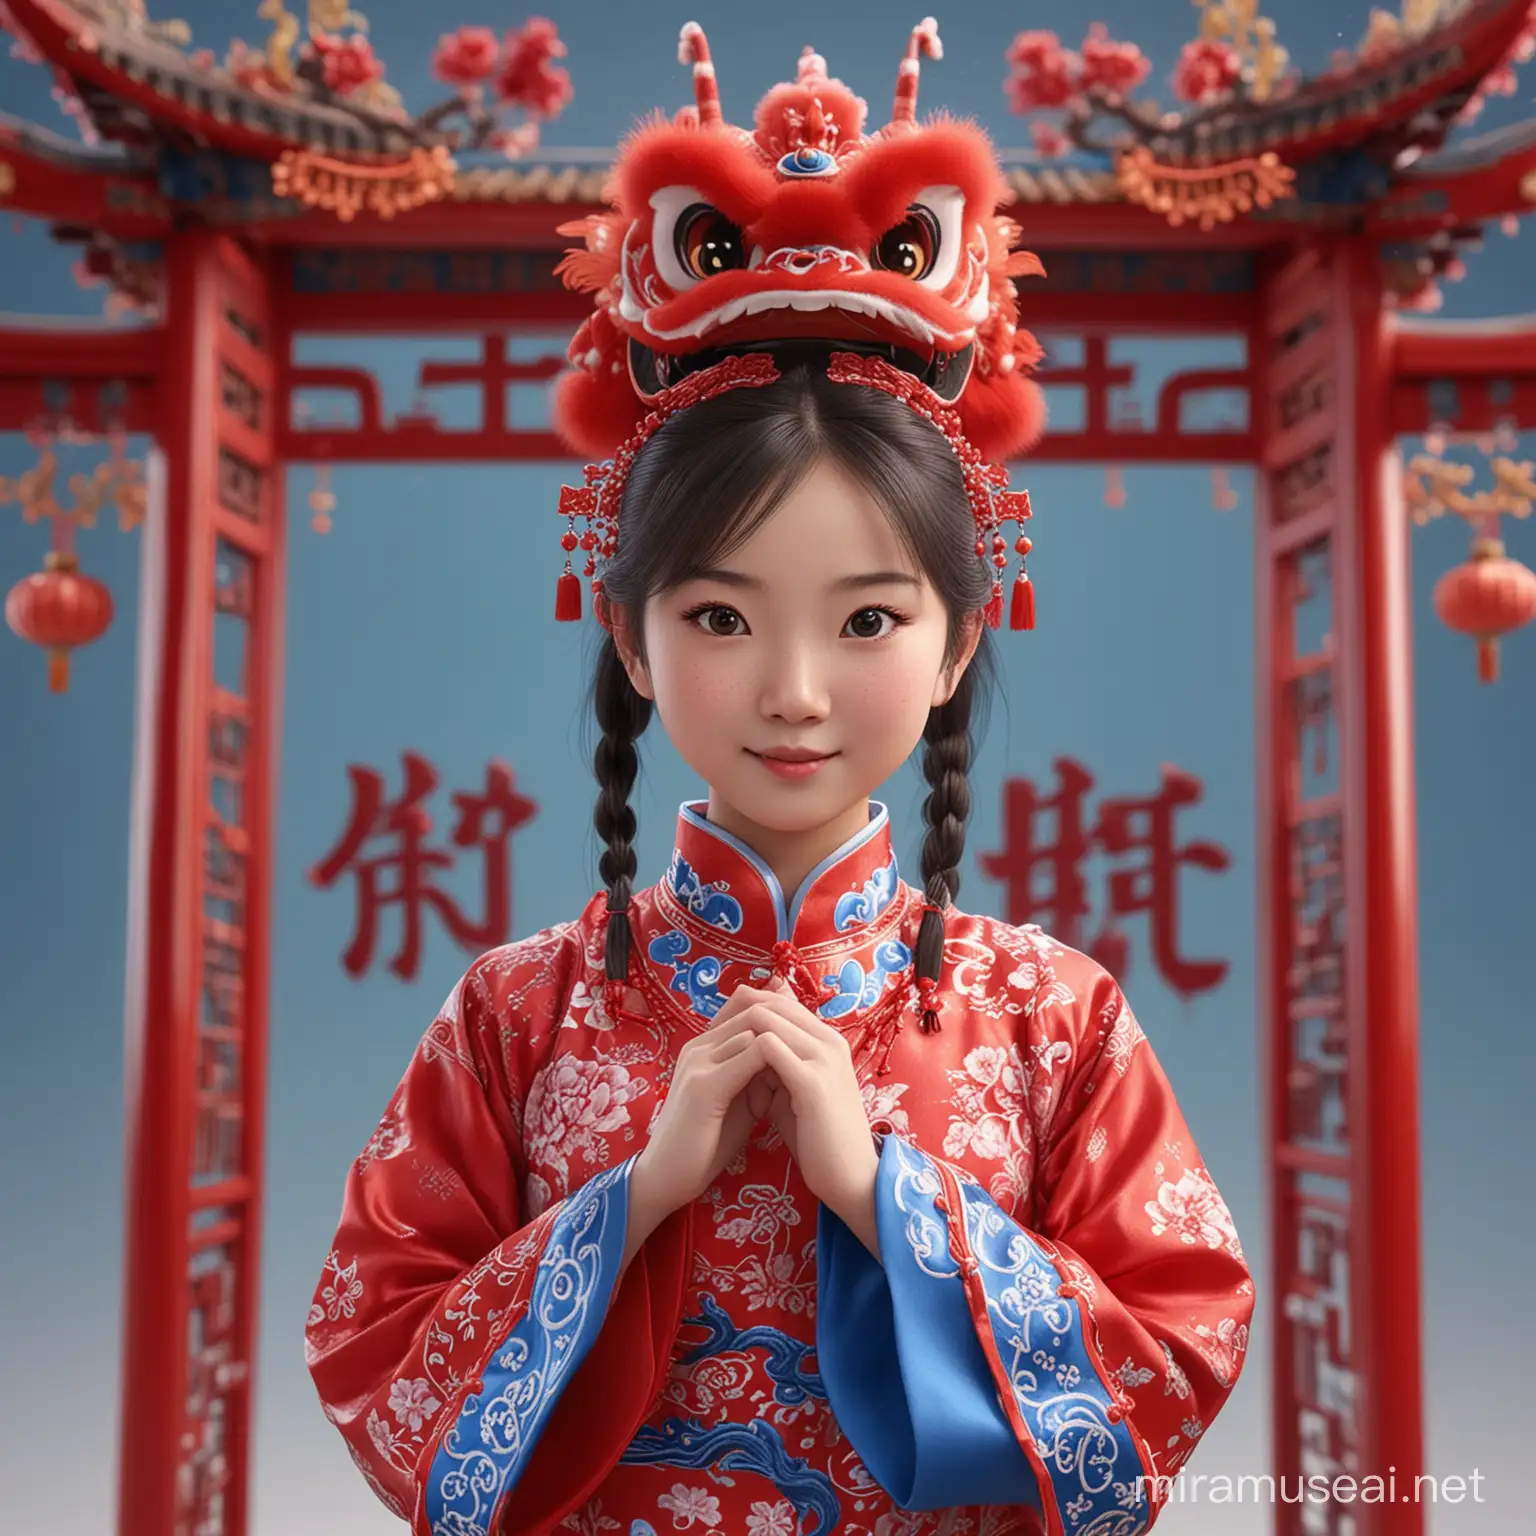 Chinese Girl in Red Lion Dance Costume and Traditional Attire with Dragon Embroidery